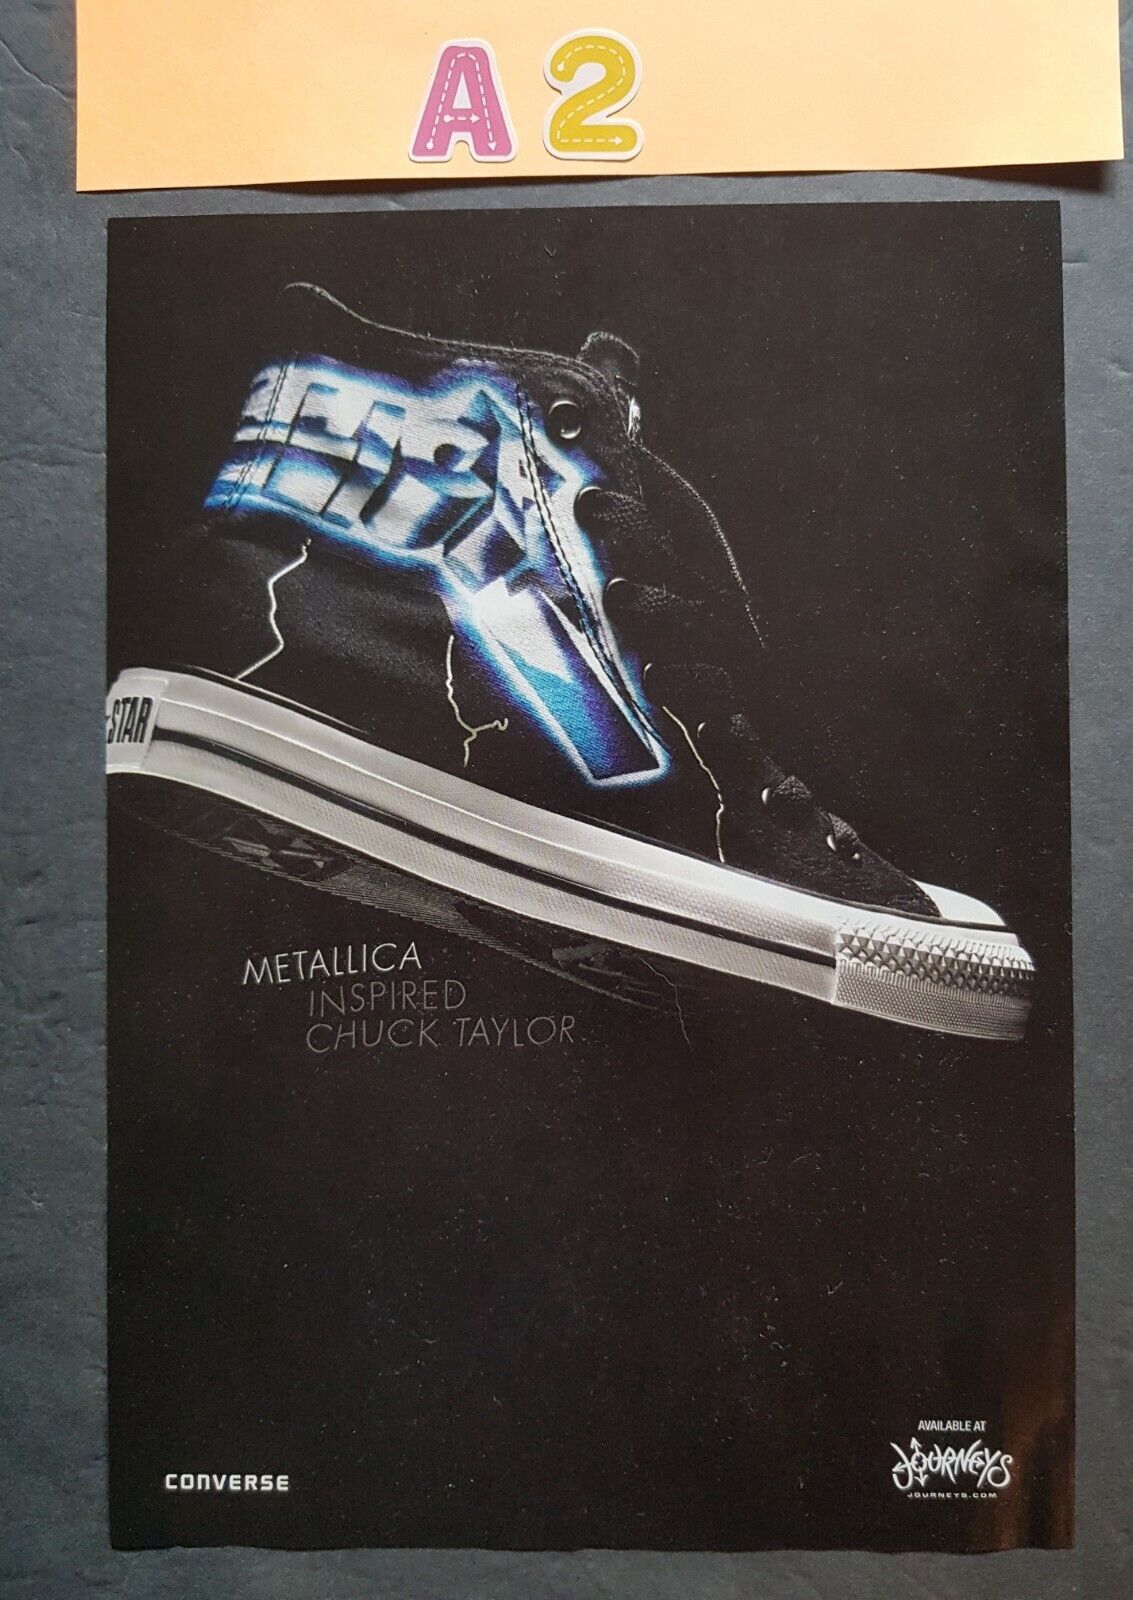 Metallica Inspired Chuck Taylor Converse Shoes Promo Print Ad Vintage 2009